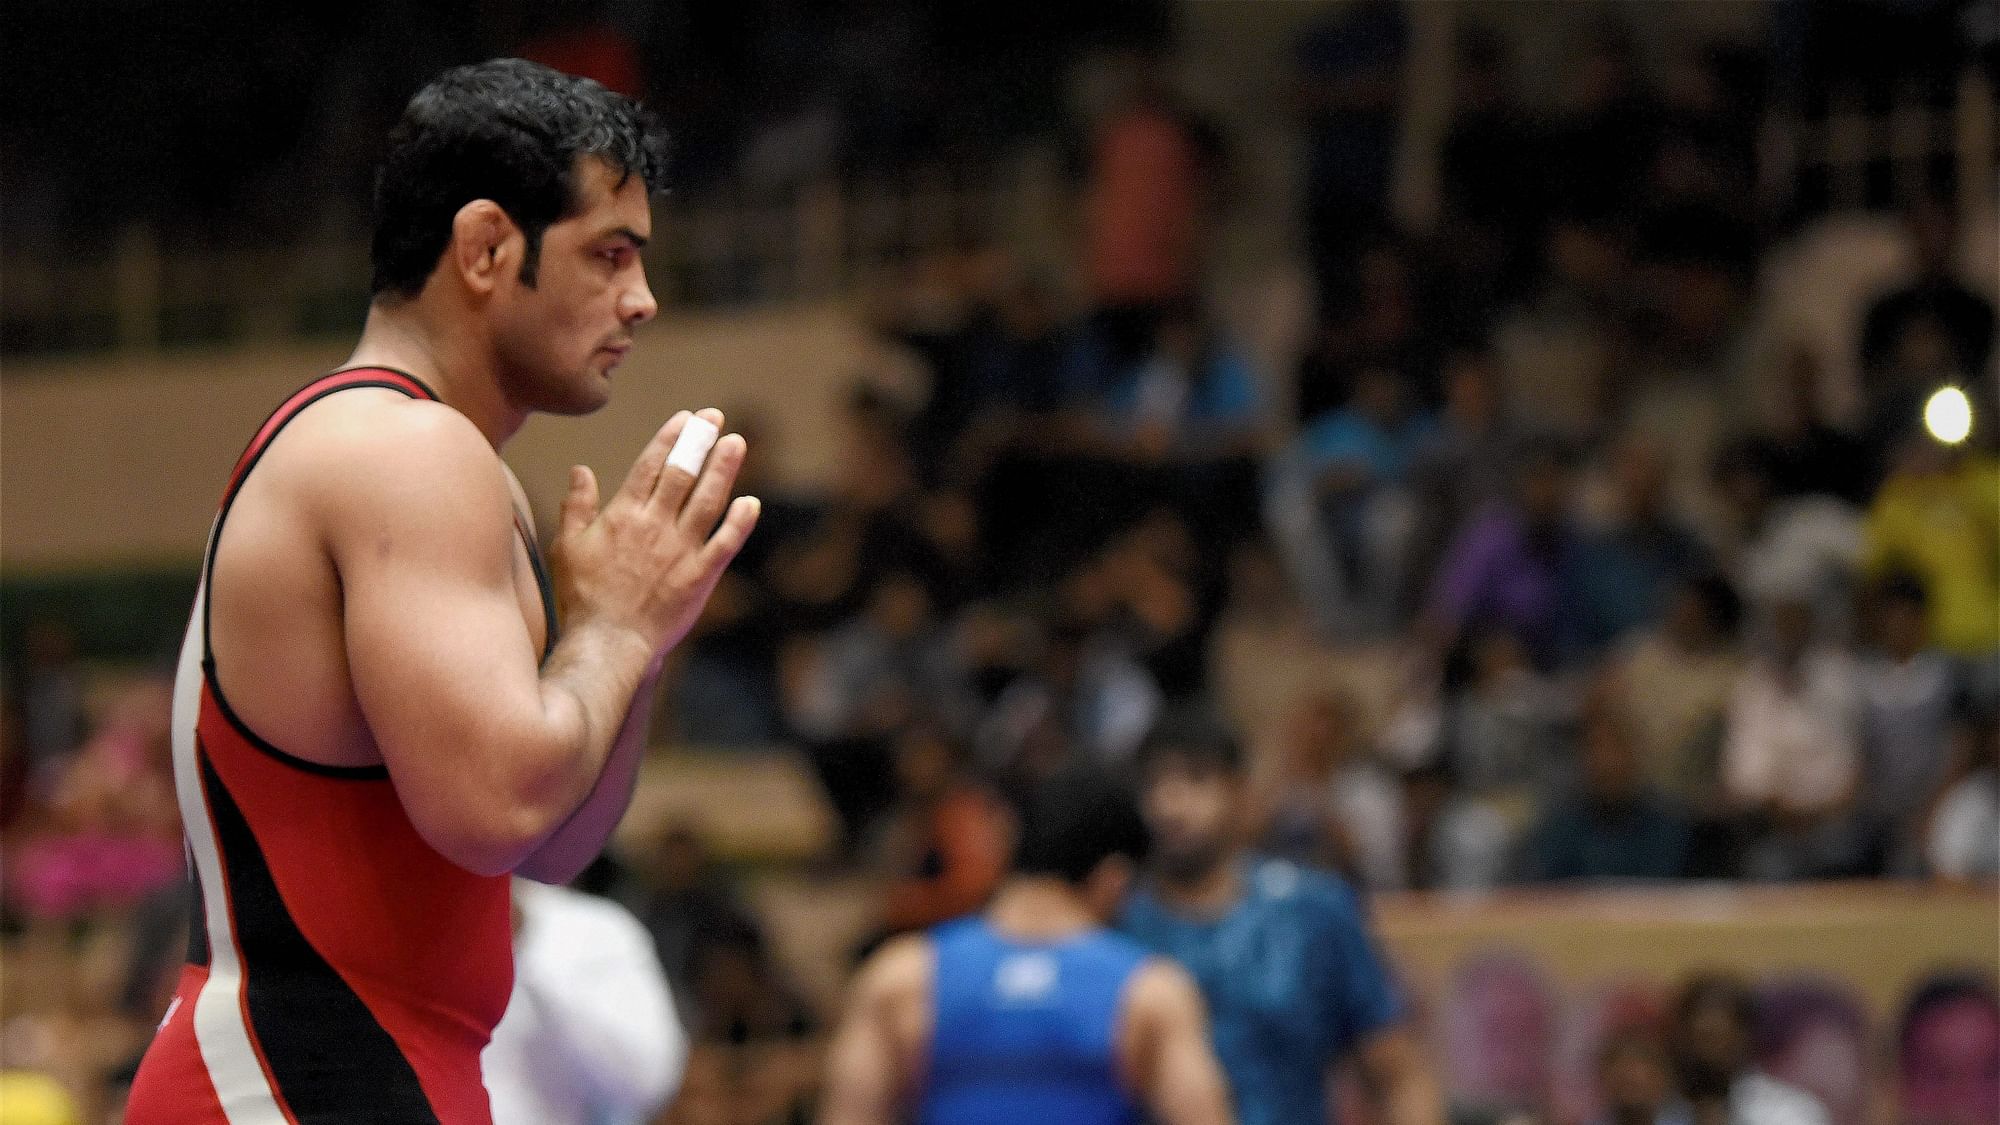 The Crime Branch of the Delhi Police took Sushil Kumar to Chhatrasal Stadium to further probe the murder case against him.